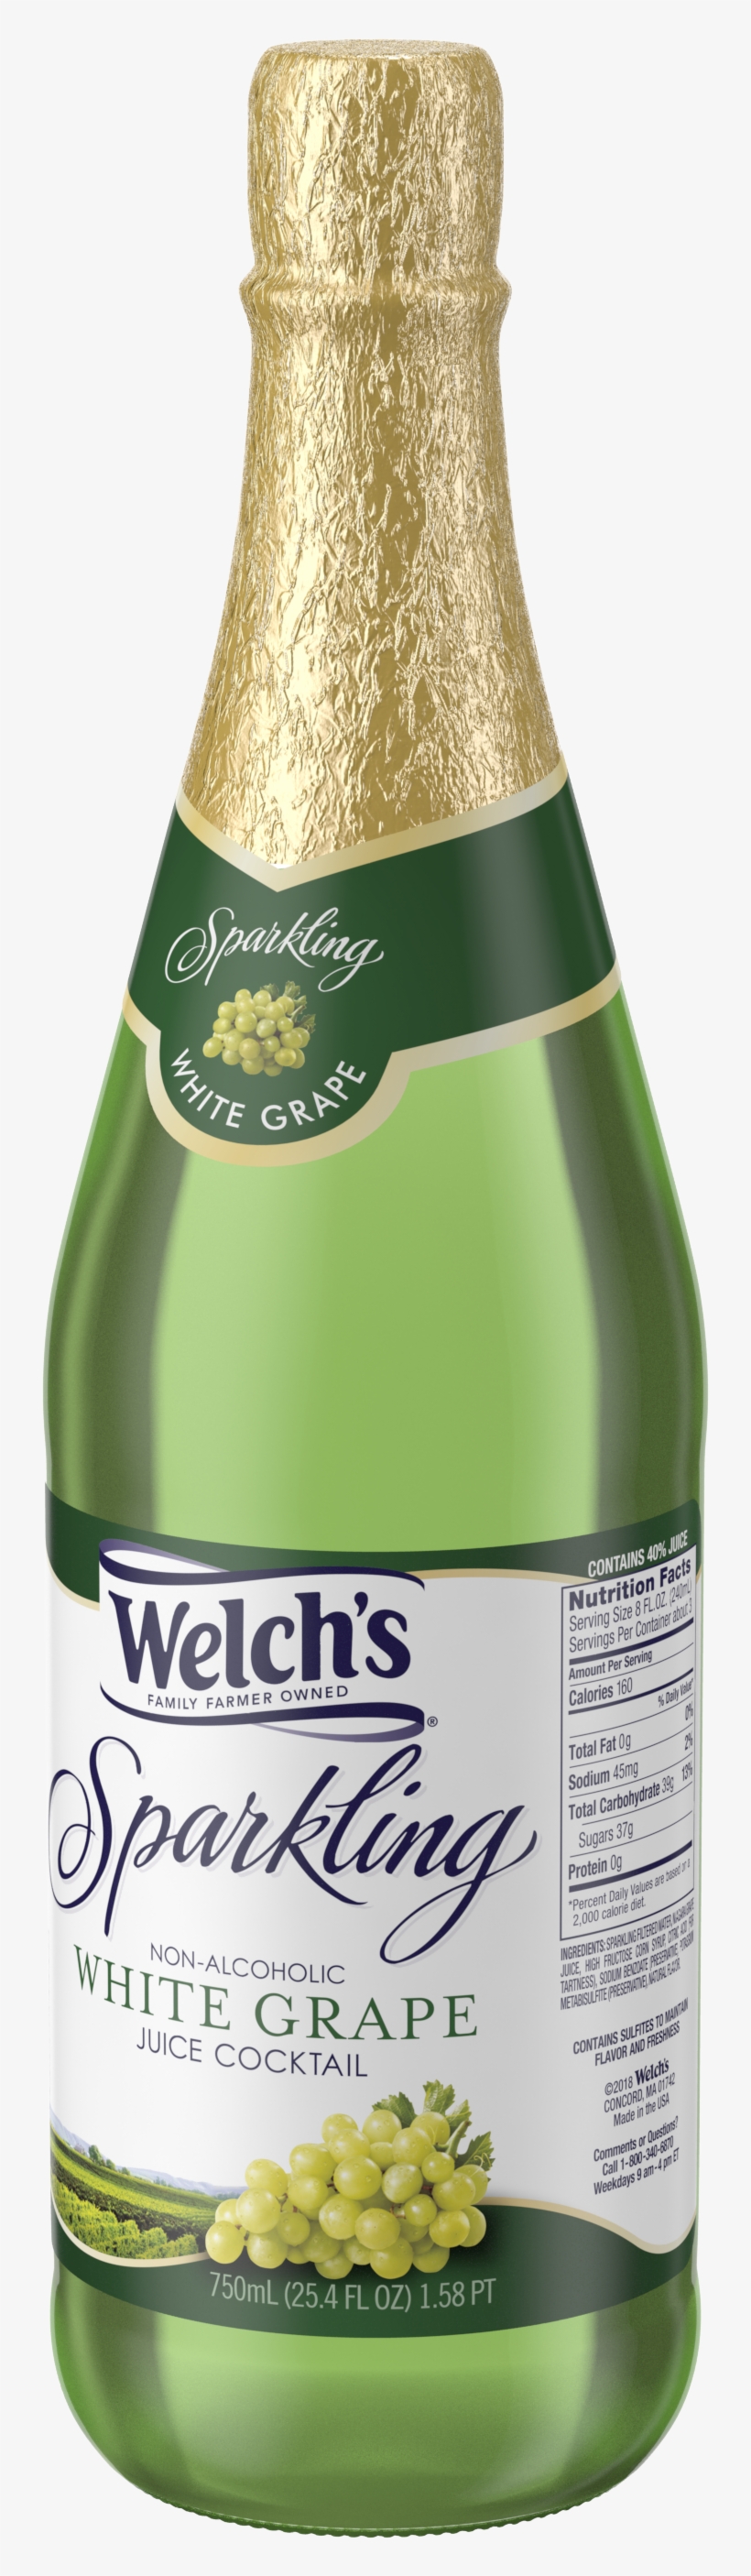 Welch's Sparkling Juice Cocktail, White Grape, - Welch's Sparkling, transparent png #2837049